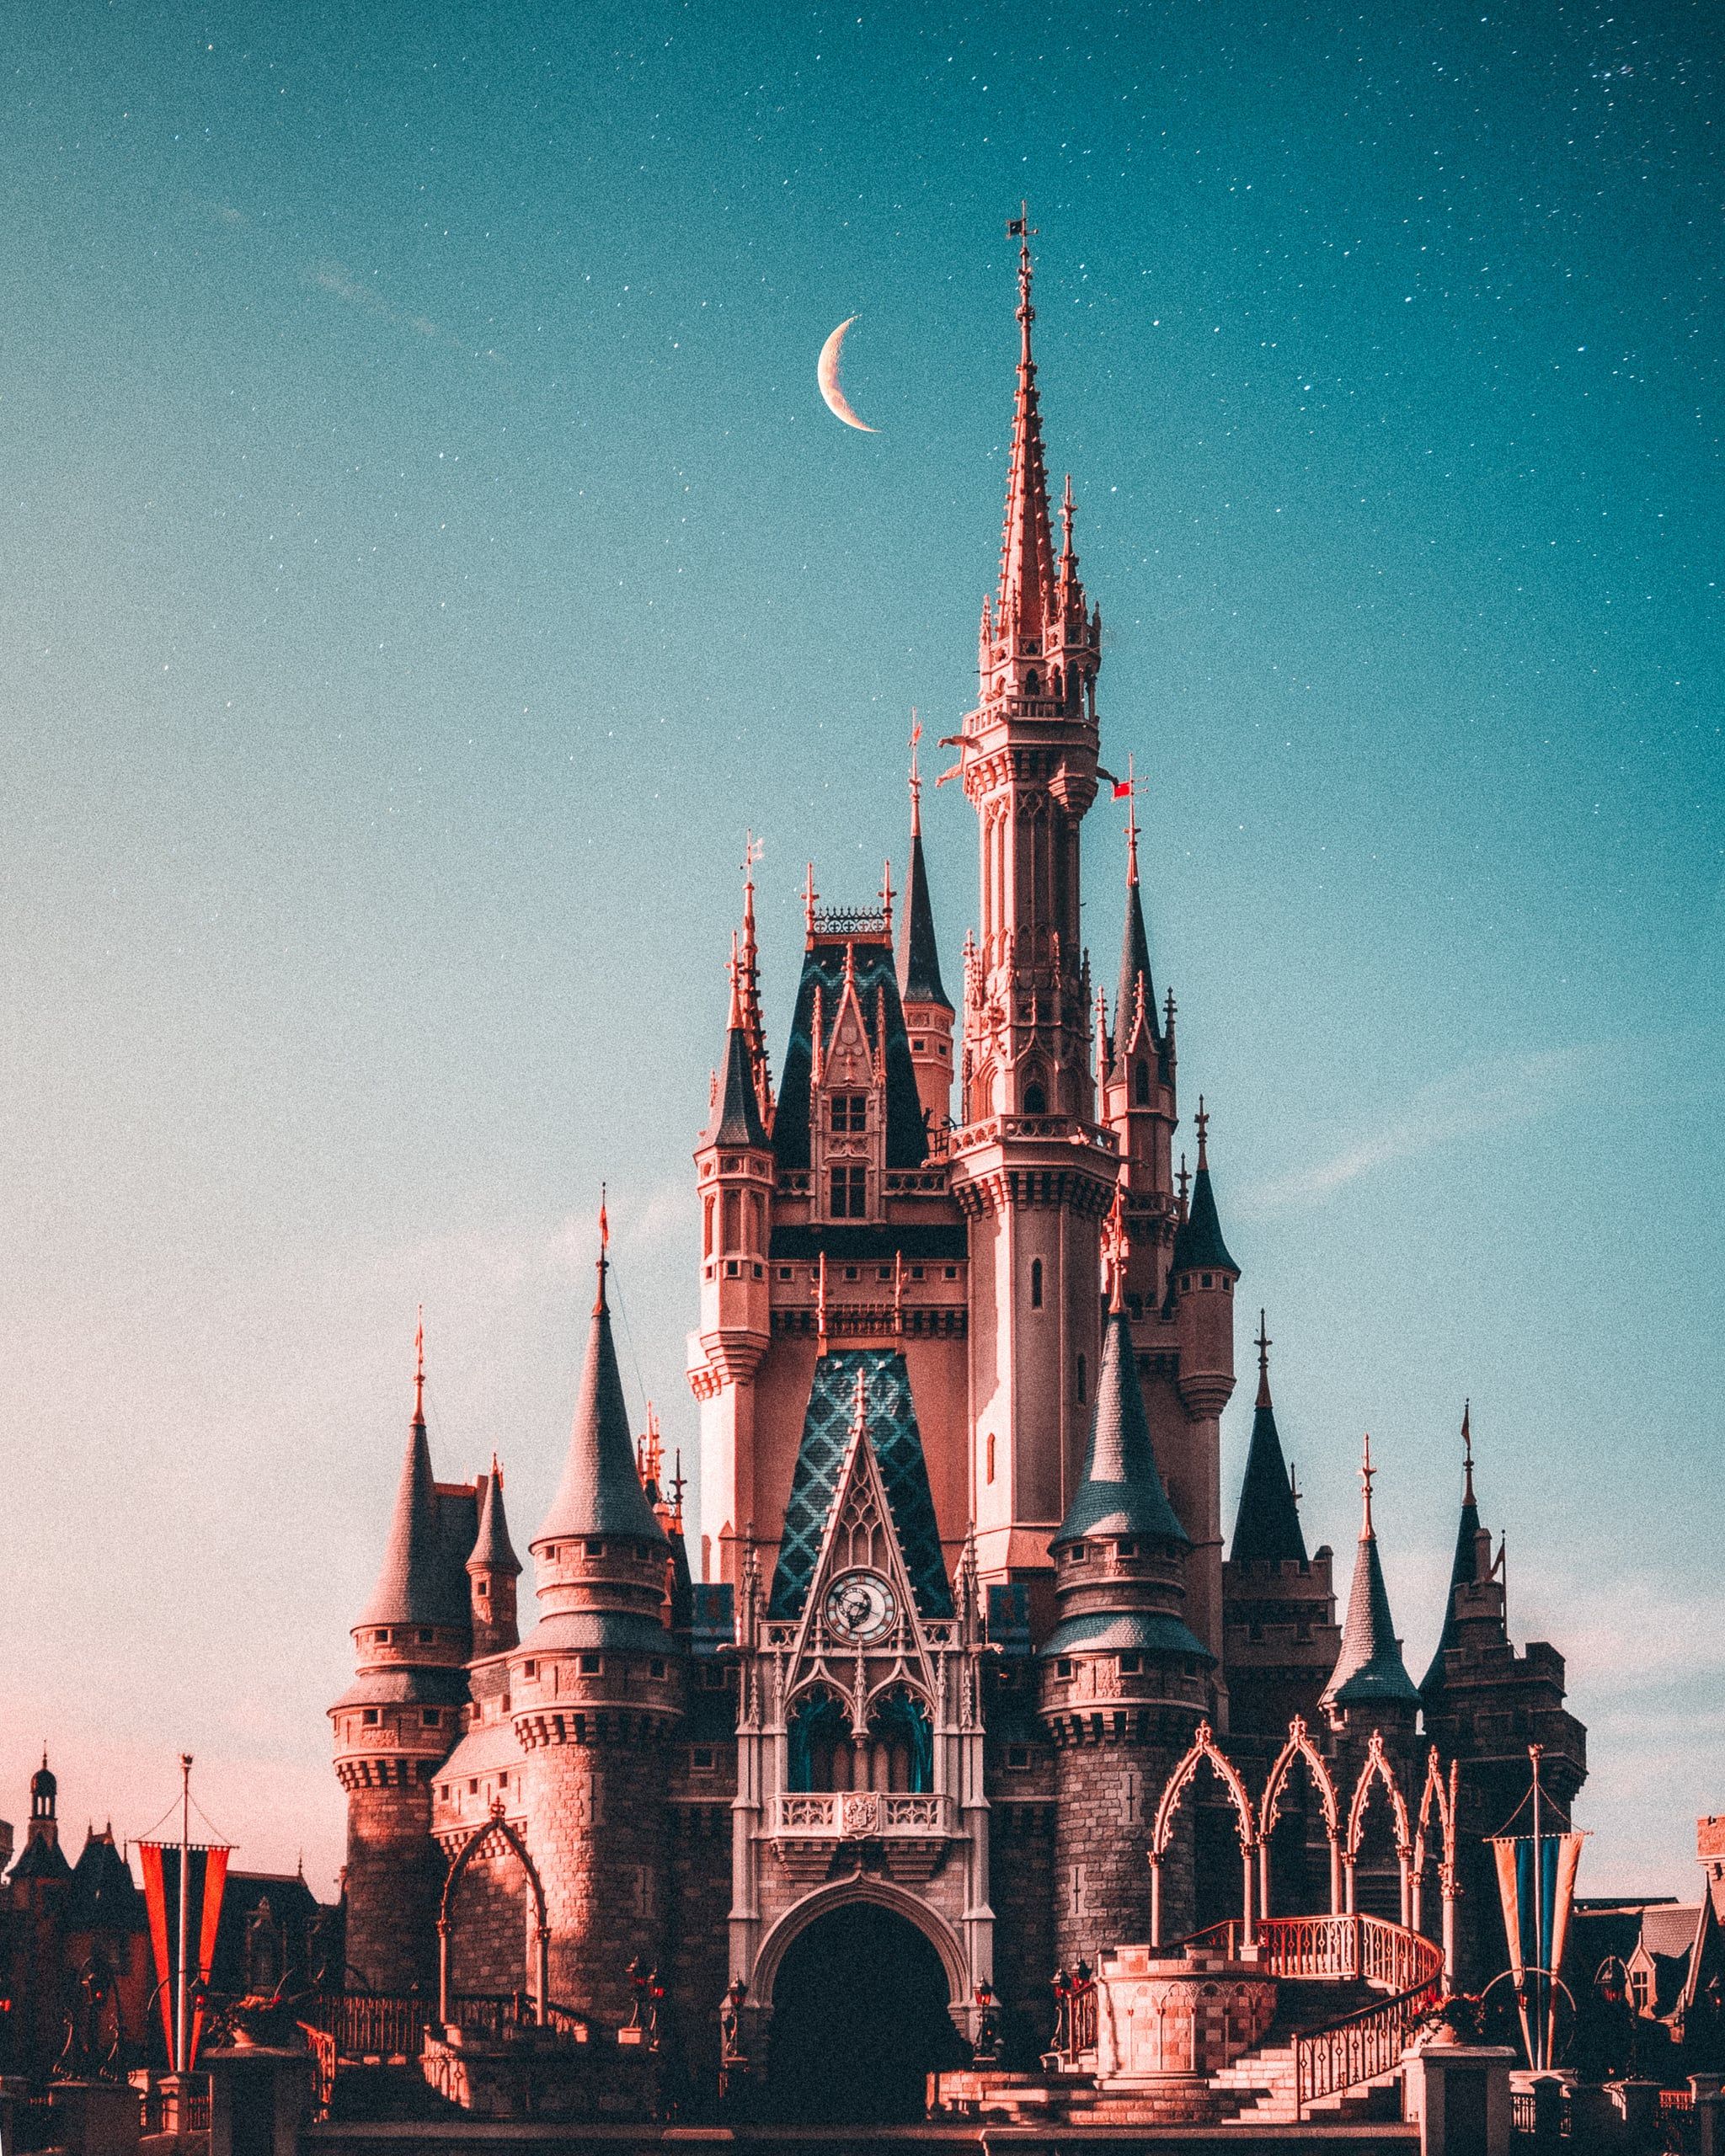 Disney iPhone Wallpaper. The Best iOS 14 Wallpaper Ideas That'll Make Your Phone Look Aesthetically Pleasing AF